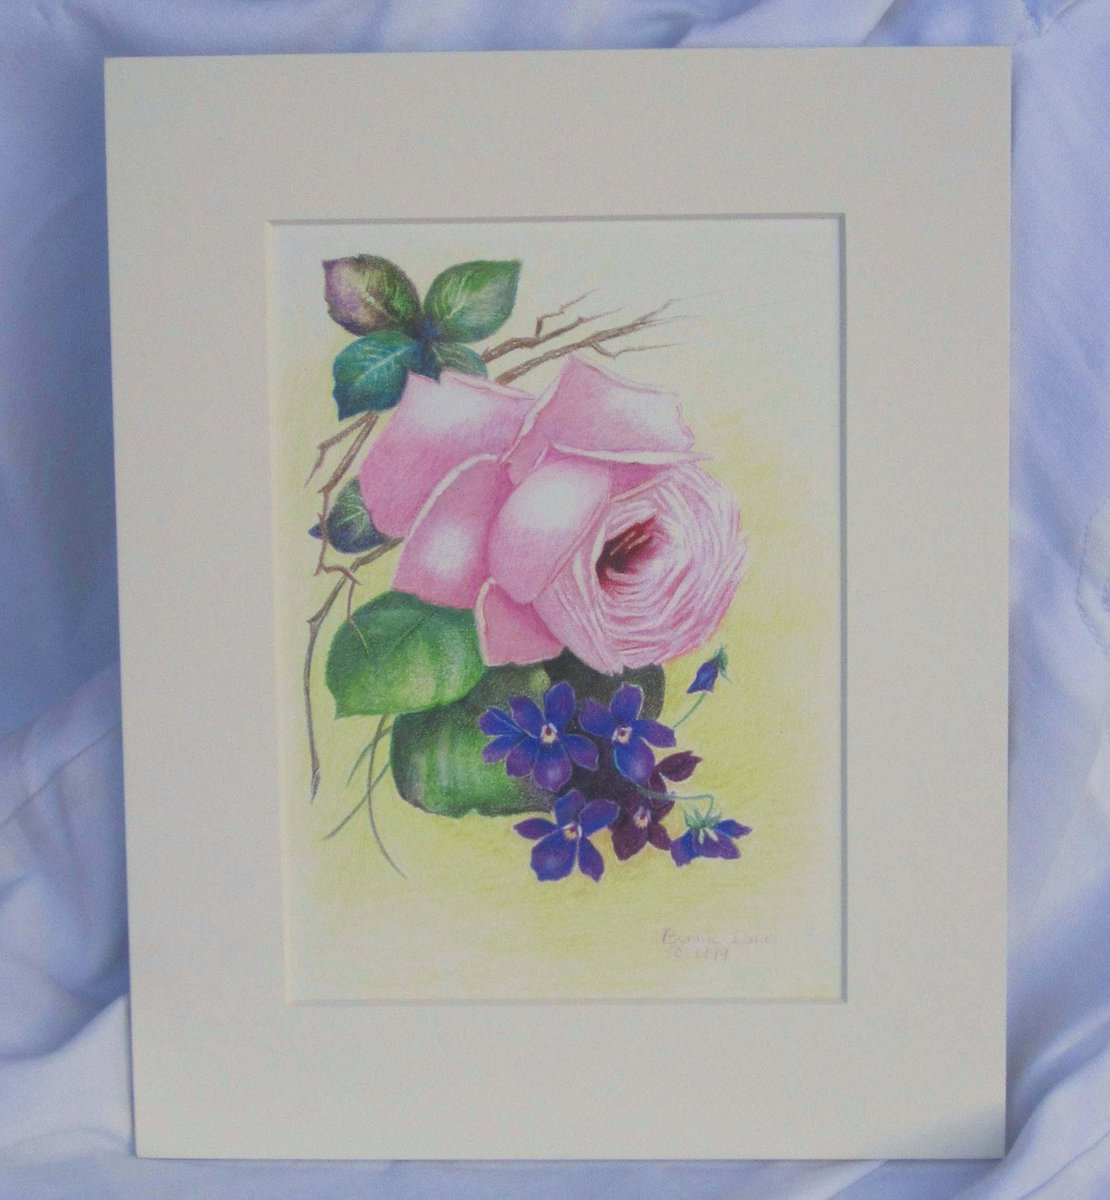 Rose Limited Edition Fine Art Print - 'Rose With Violets' -  Handmade - Retouched w/Colored Pencil Laser Print - Free Shipping etsy.me/2QVCqGc #artoftheday #fineart #Handmade #ArtistOnTwitter #TMTinsta #fineartforsale #FloralArtPrint